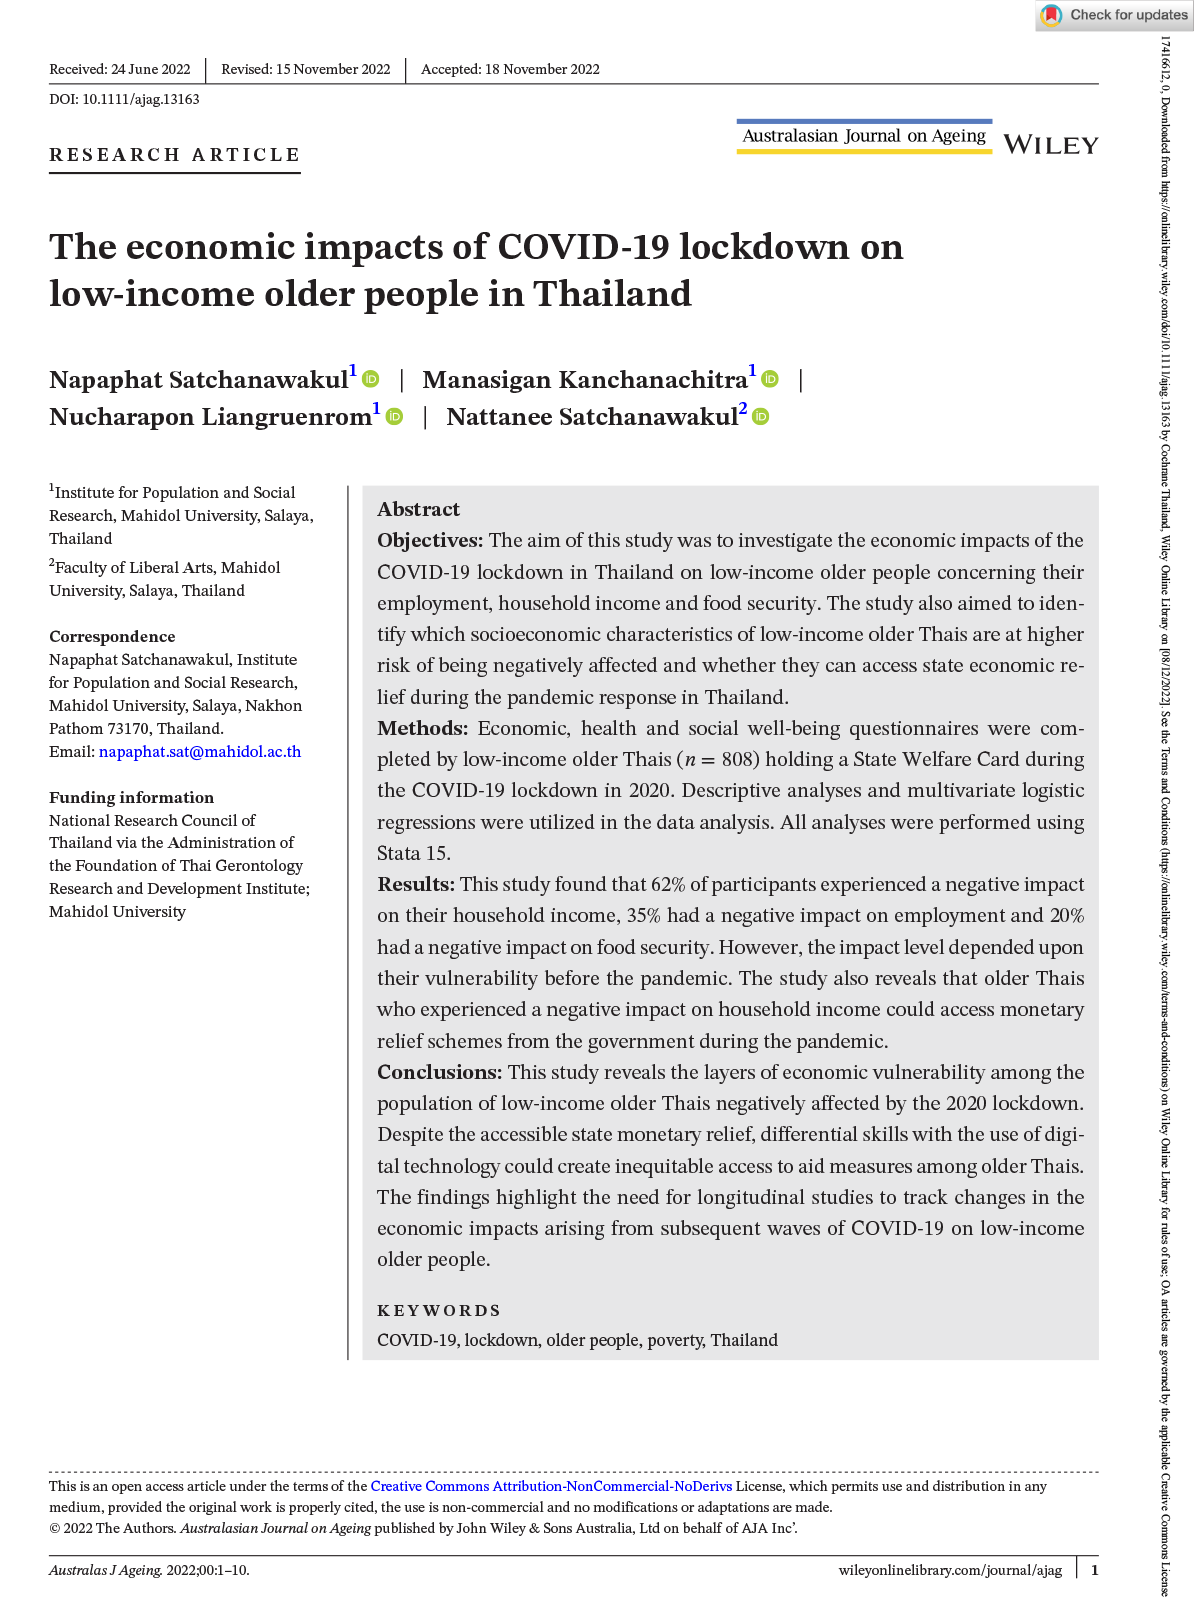 The economic impacts of COVID‐19 lockdown on low‐income older people in Thailand